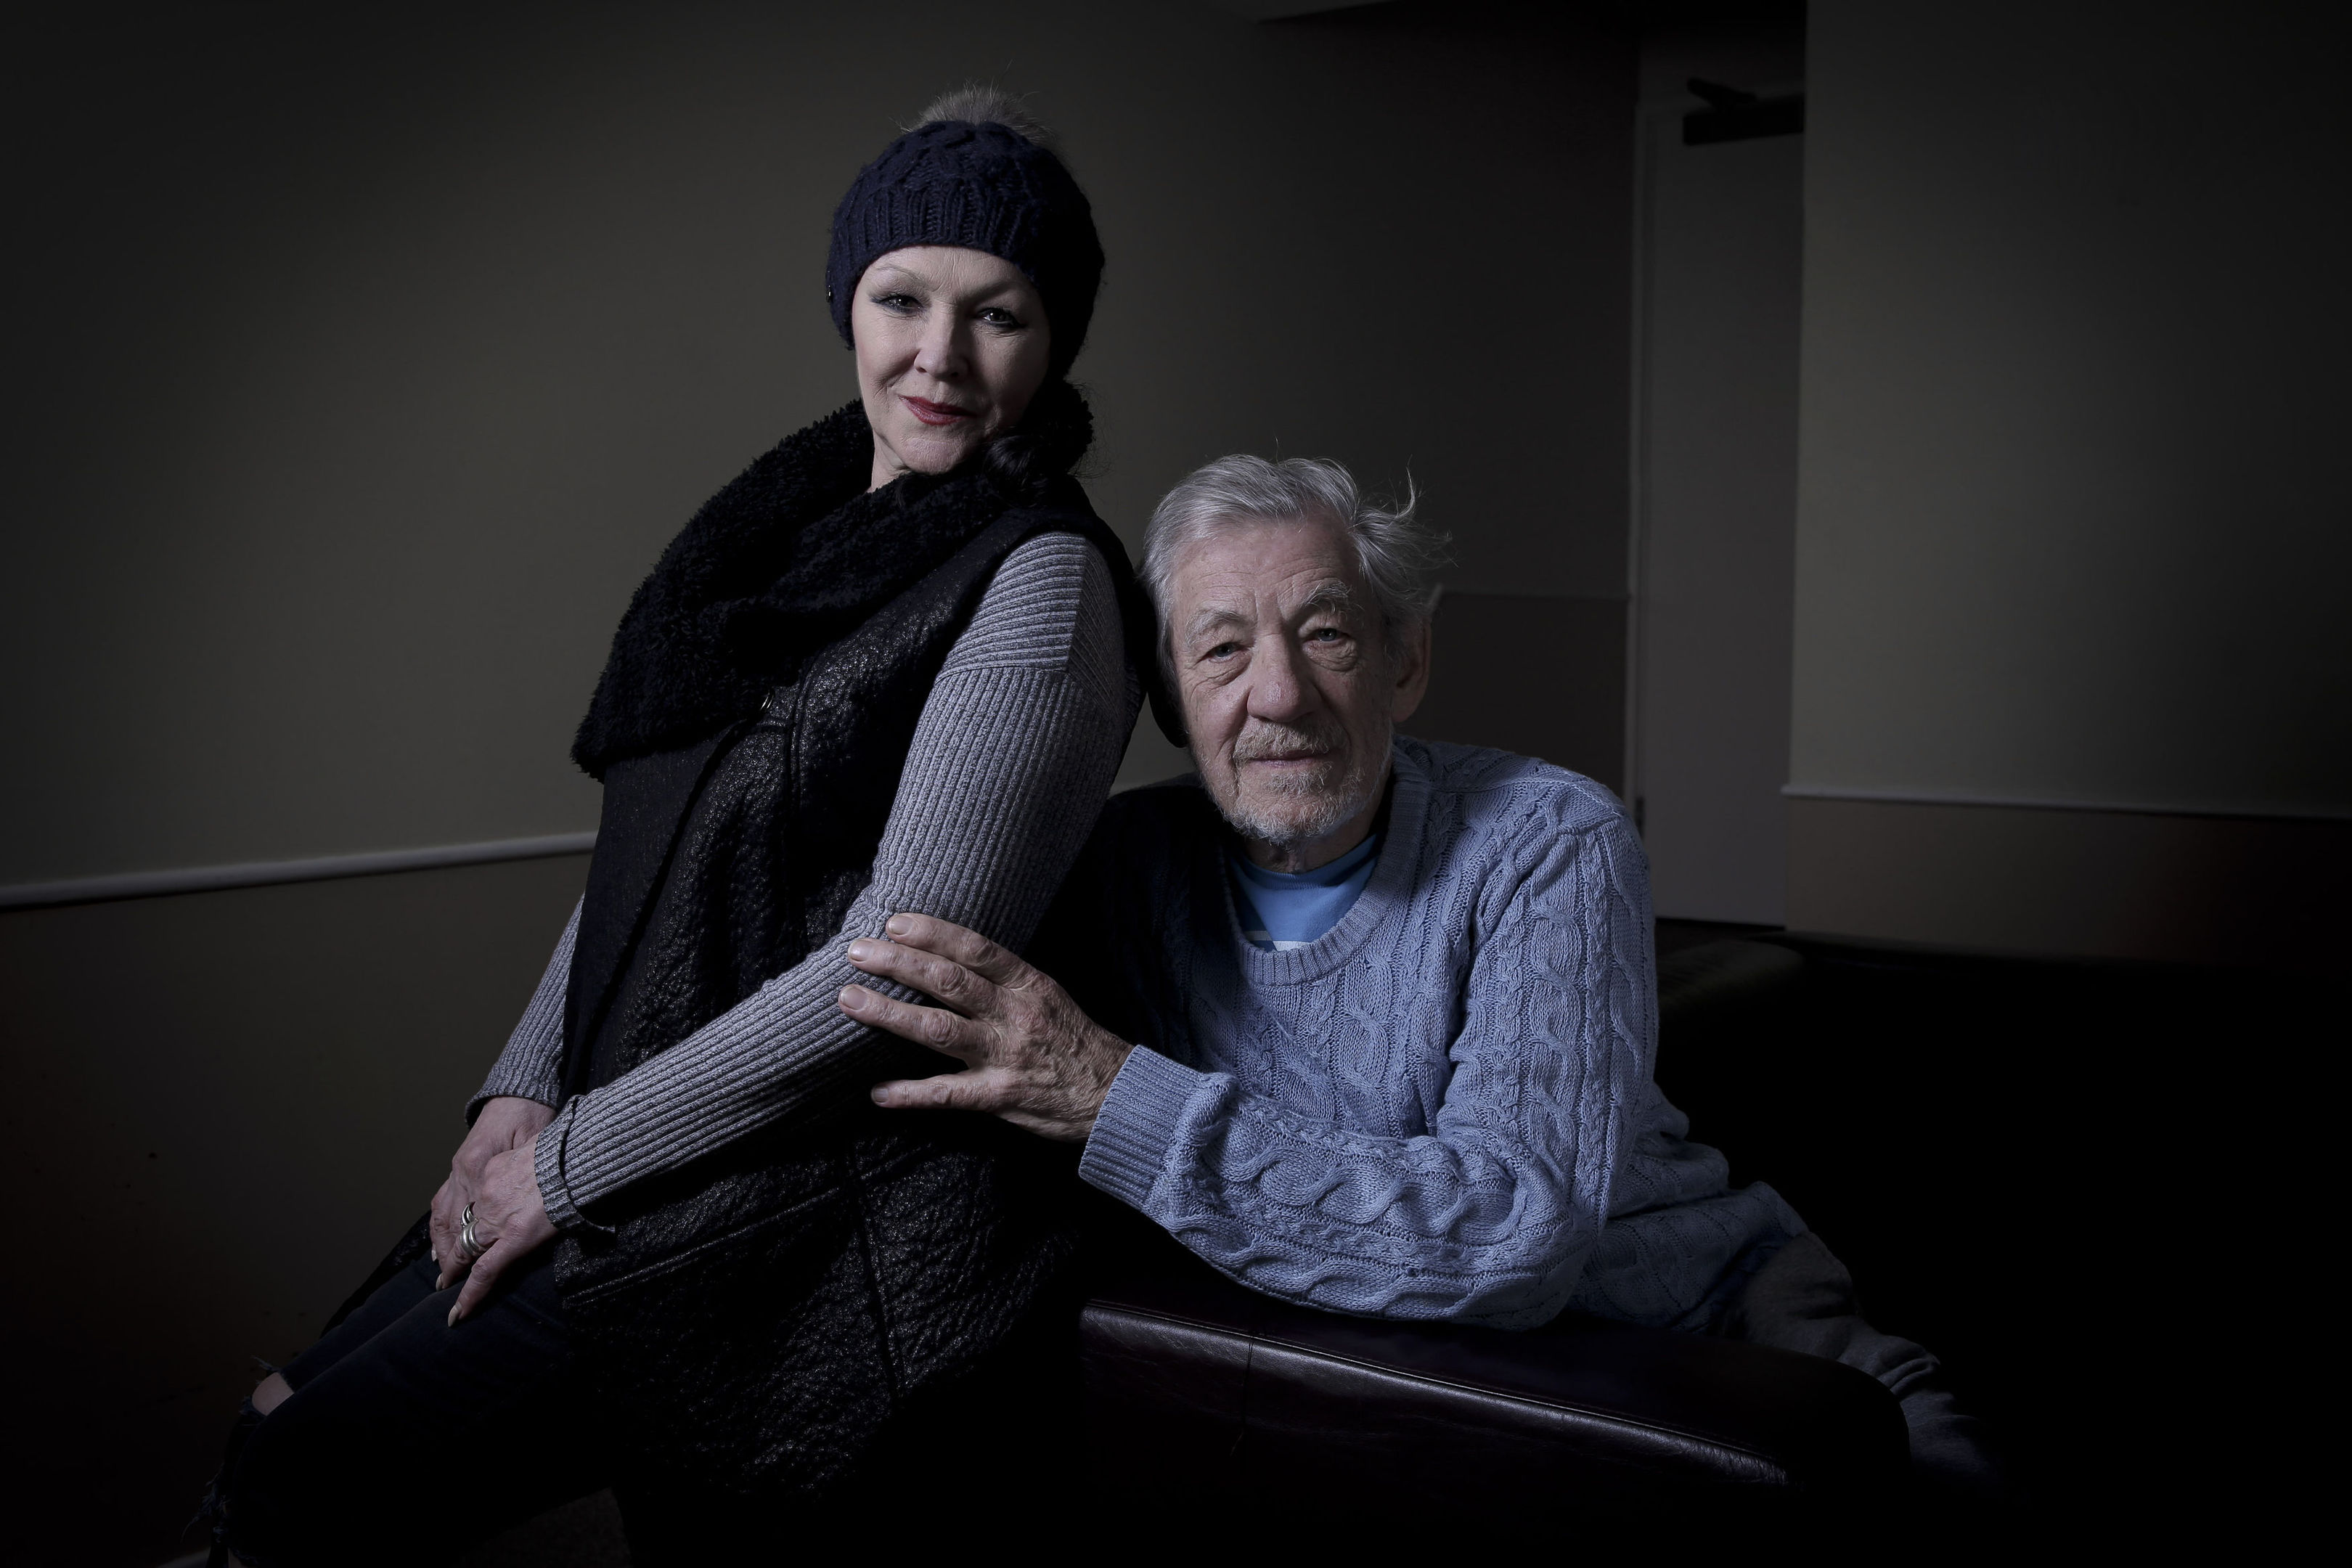 Sir Ian McKellen and Frances Barber, who will star in a new adaptation of Paradise Lost on Radio 4. (Tricia Yourkevich/BBC/PA Wire)